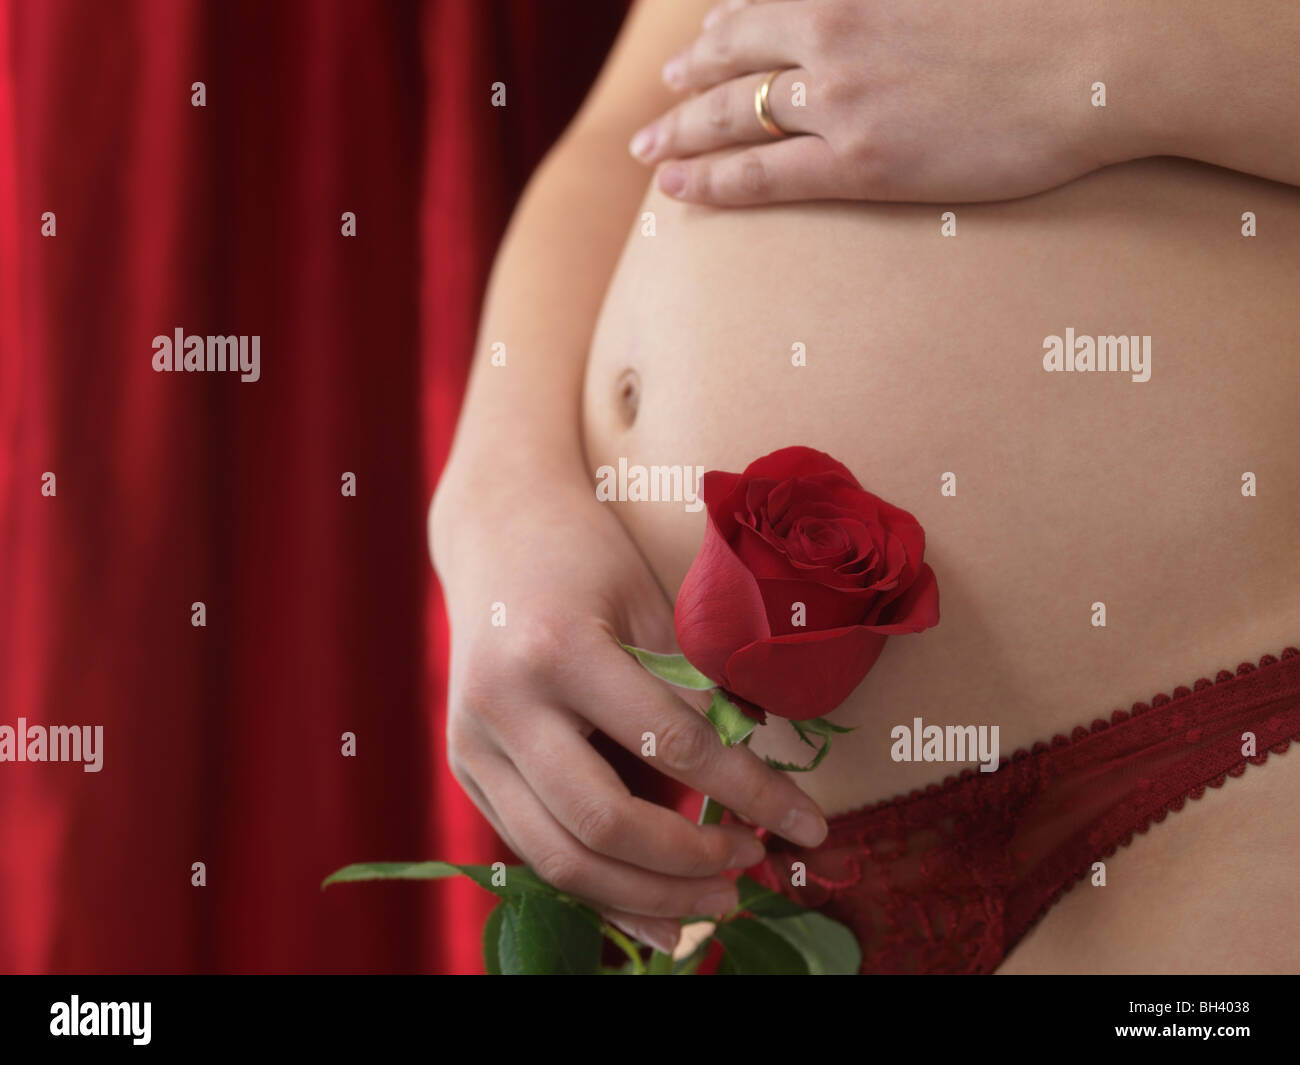 Pregnant woman with a red rose in her hand Stock Photo